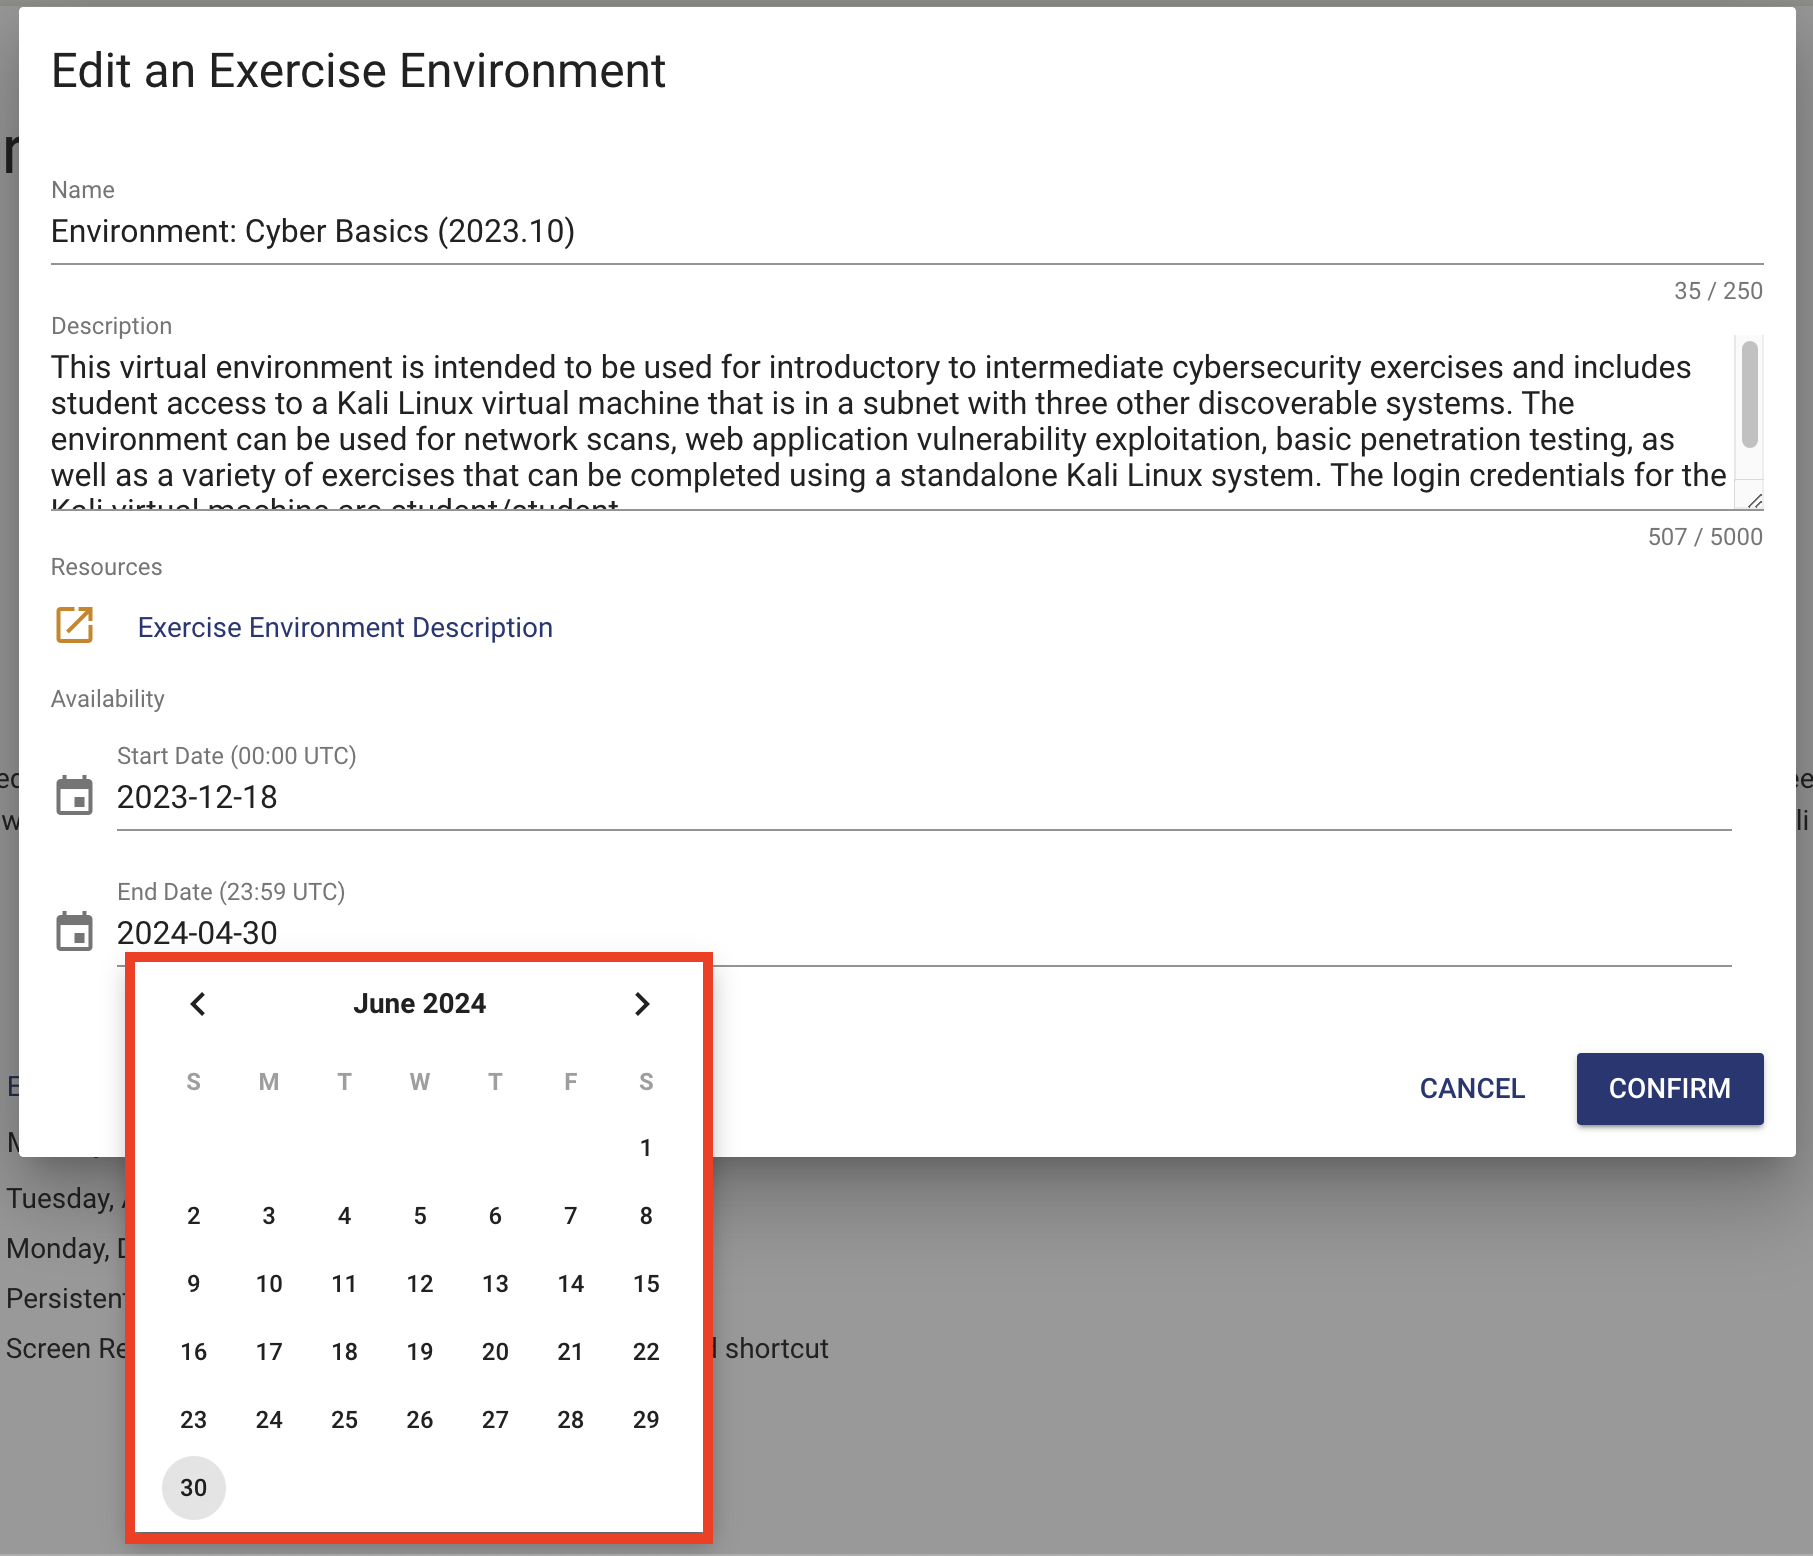 After selecting the start date or end date field, a calendar will display that allows you to pick dates.